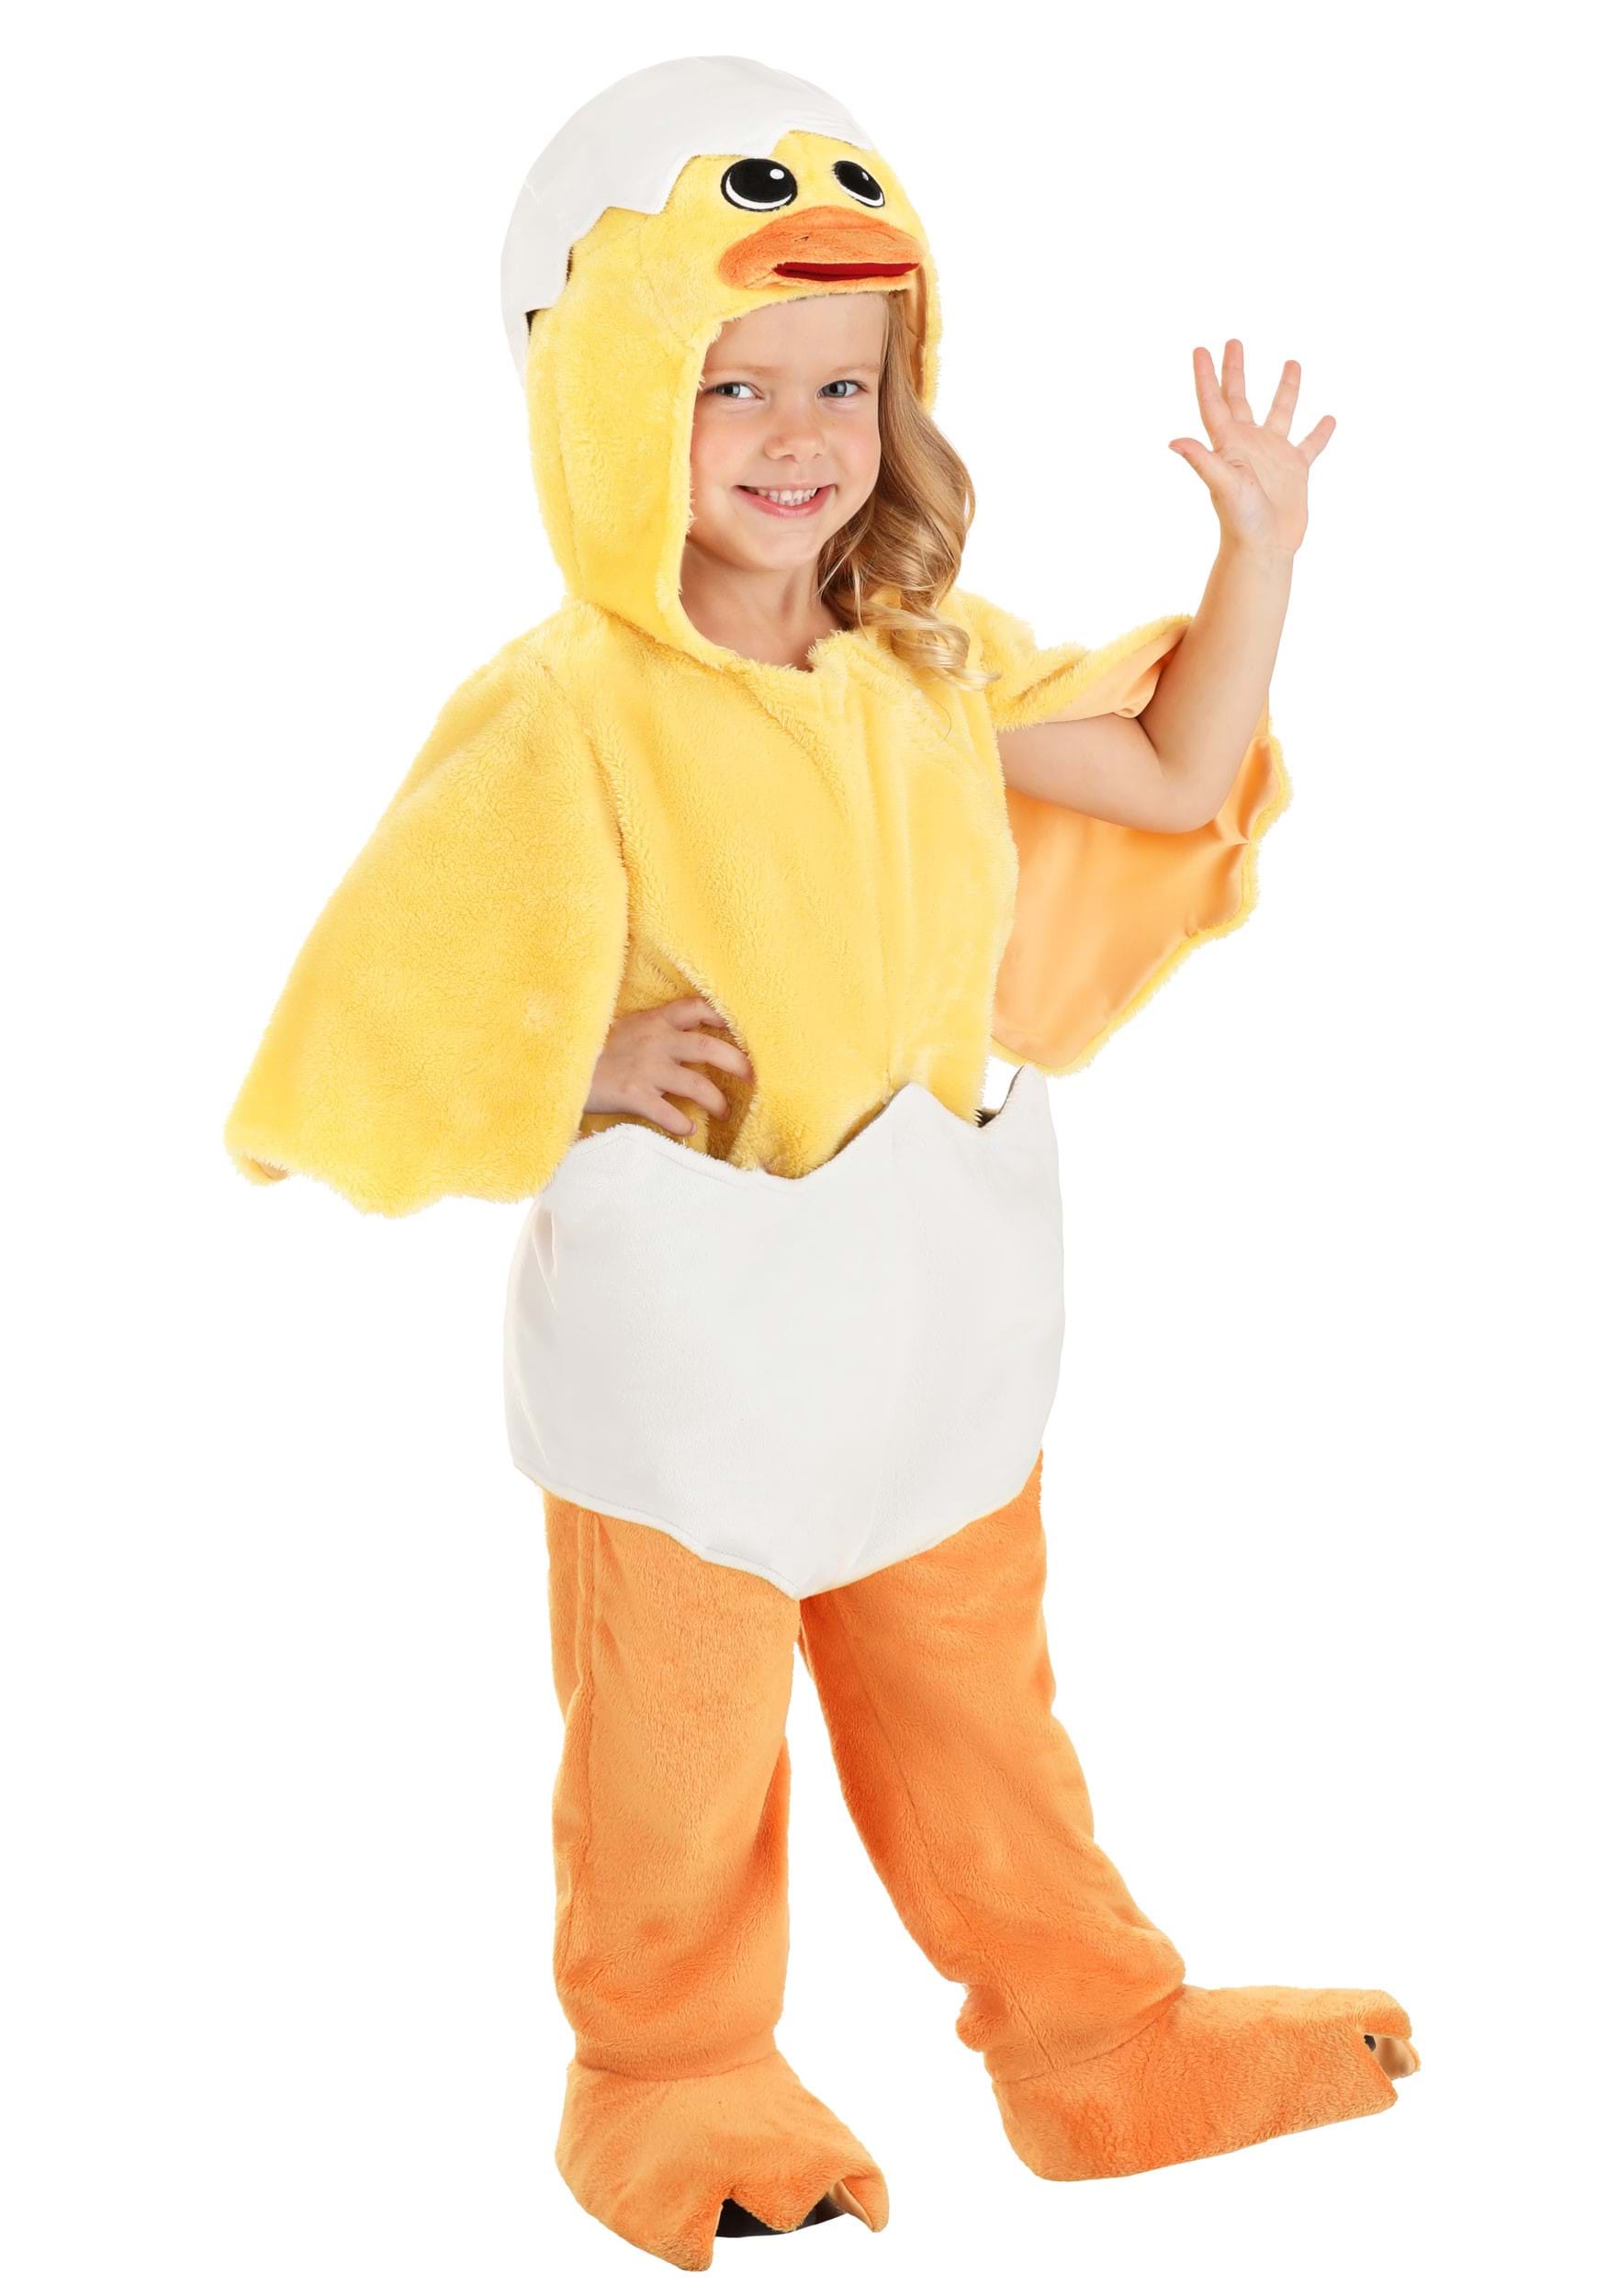 Photos - Fancy Dress Toddler FUN Costumes Hatching Duck Costume for Toddlers | Farm Animal Costumes Whi 